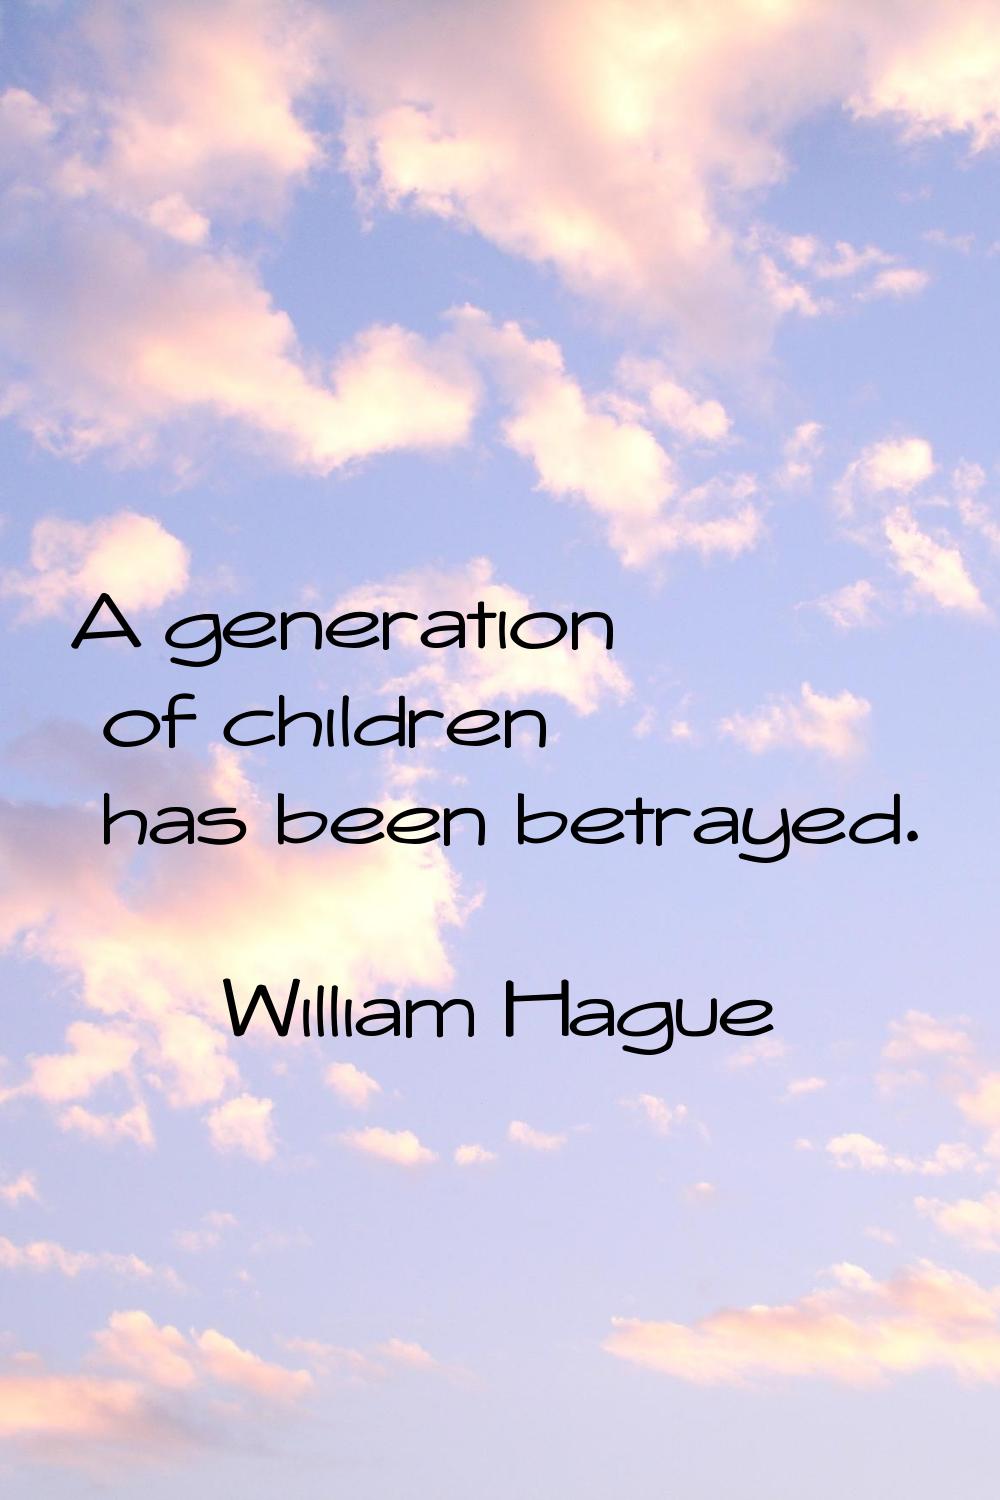 A generation of children has been betrayed.